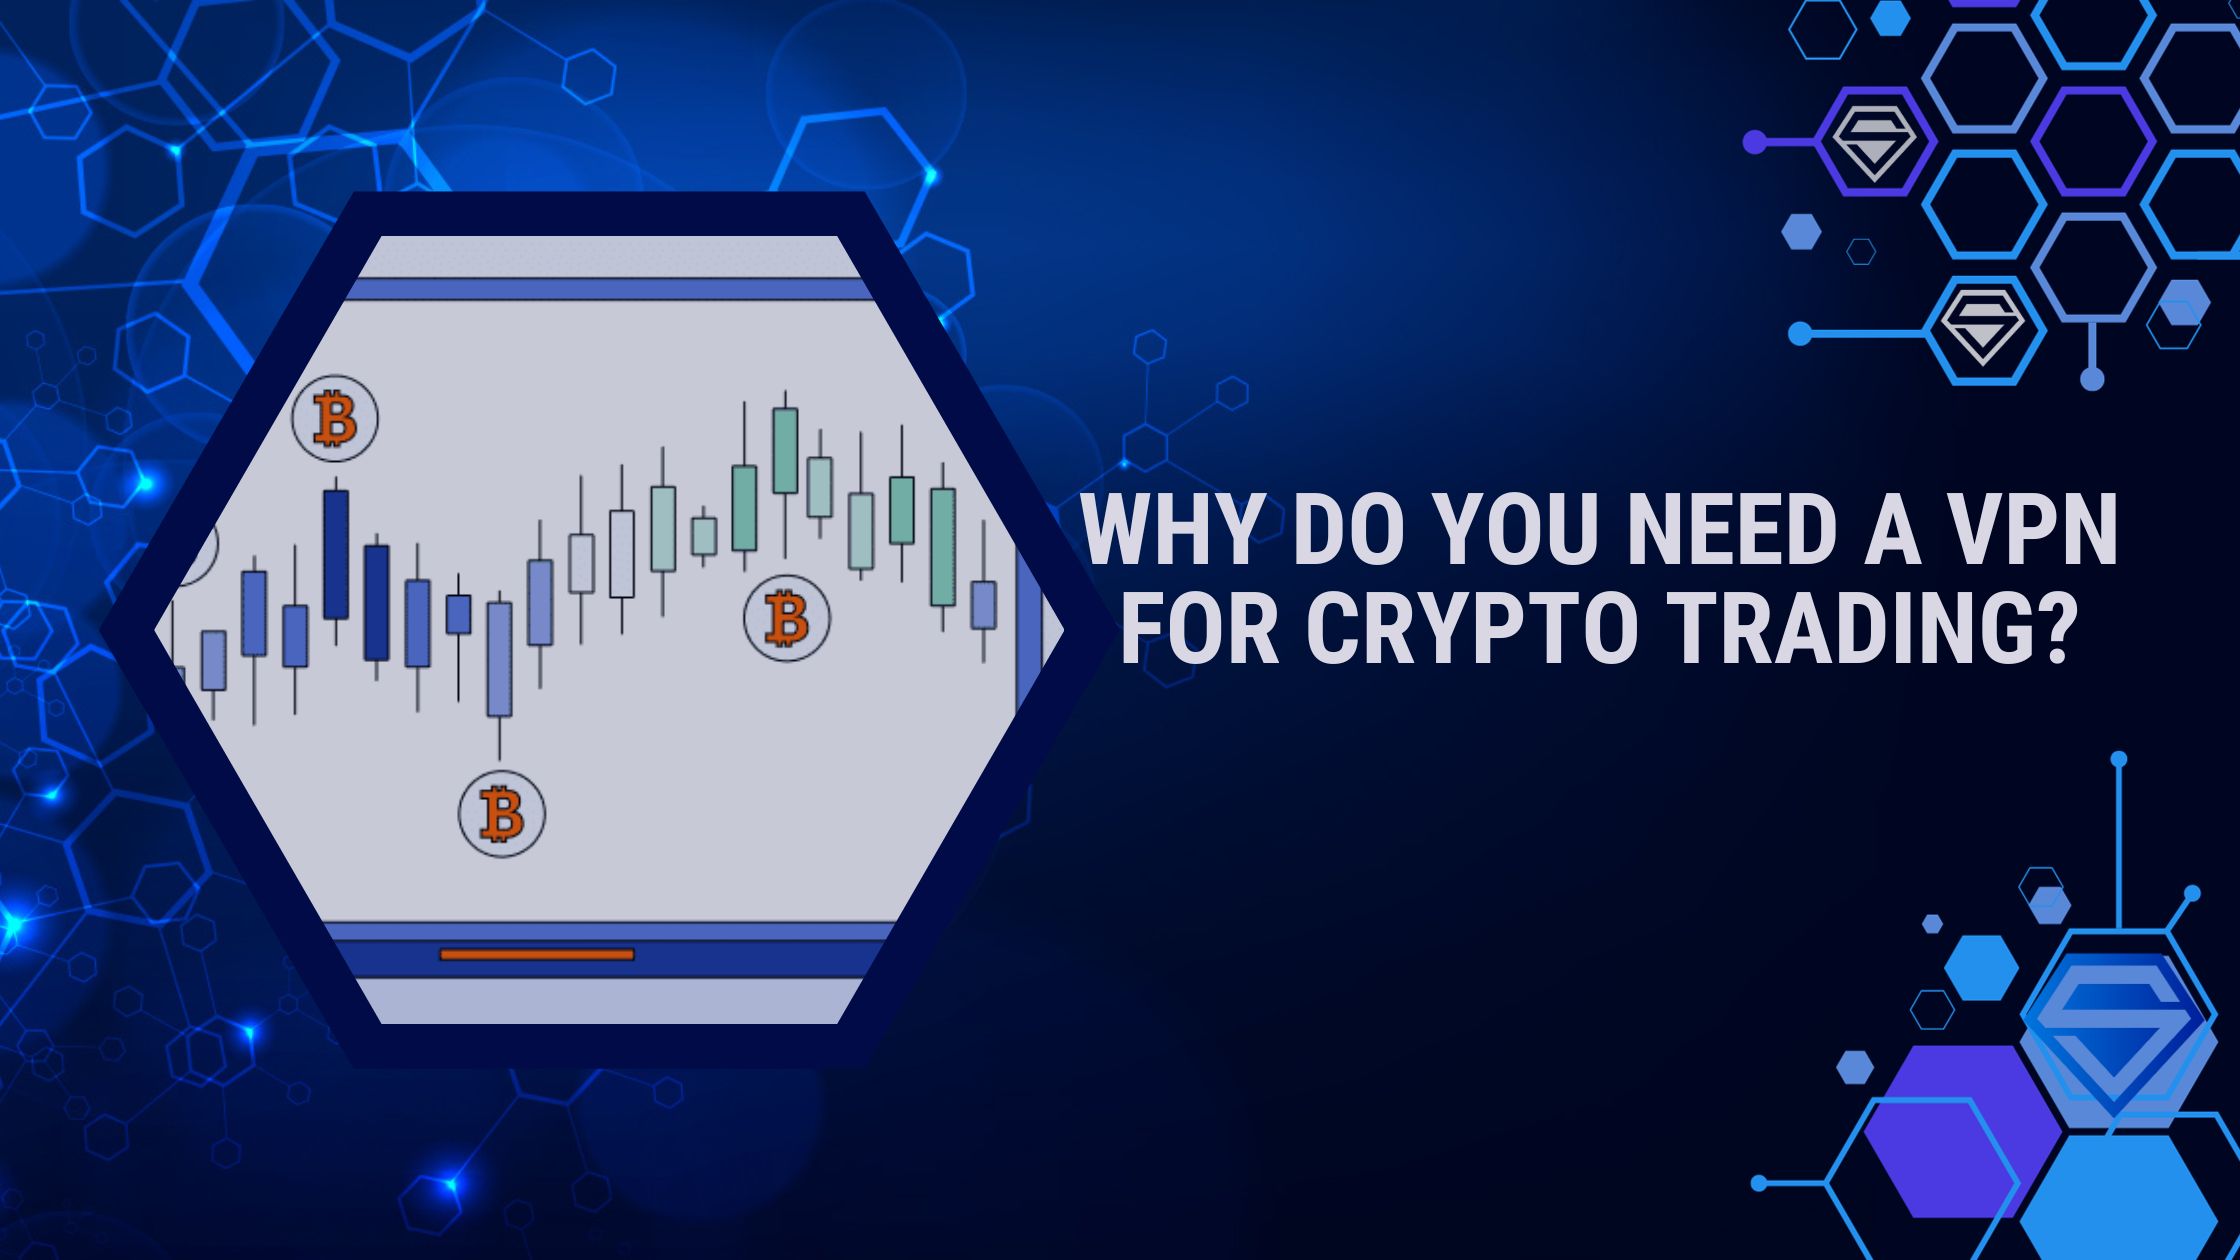 Why Do You Need a VPN for Crypto Trading?